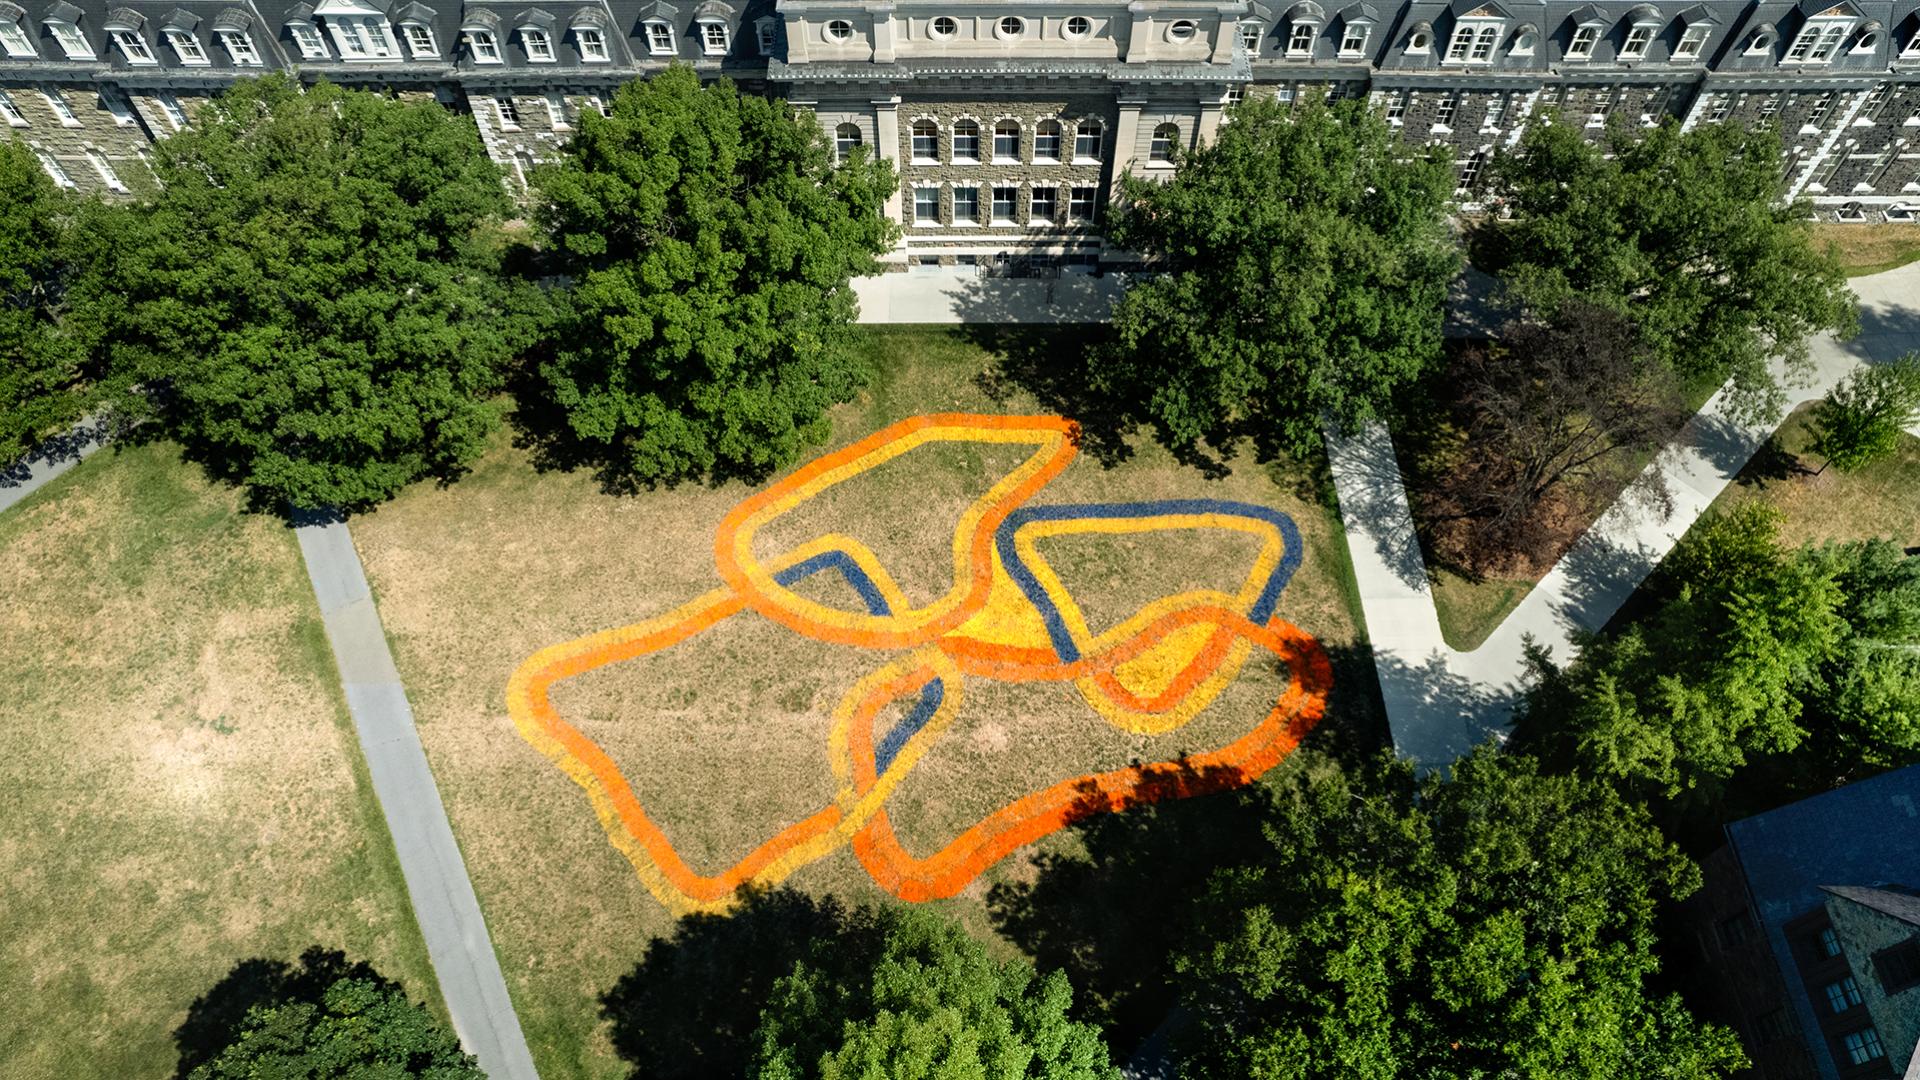 A grassy quad painted with a design as seen from above.